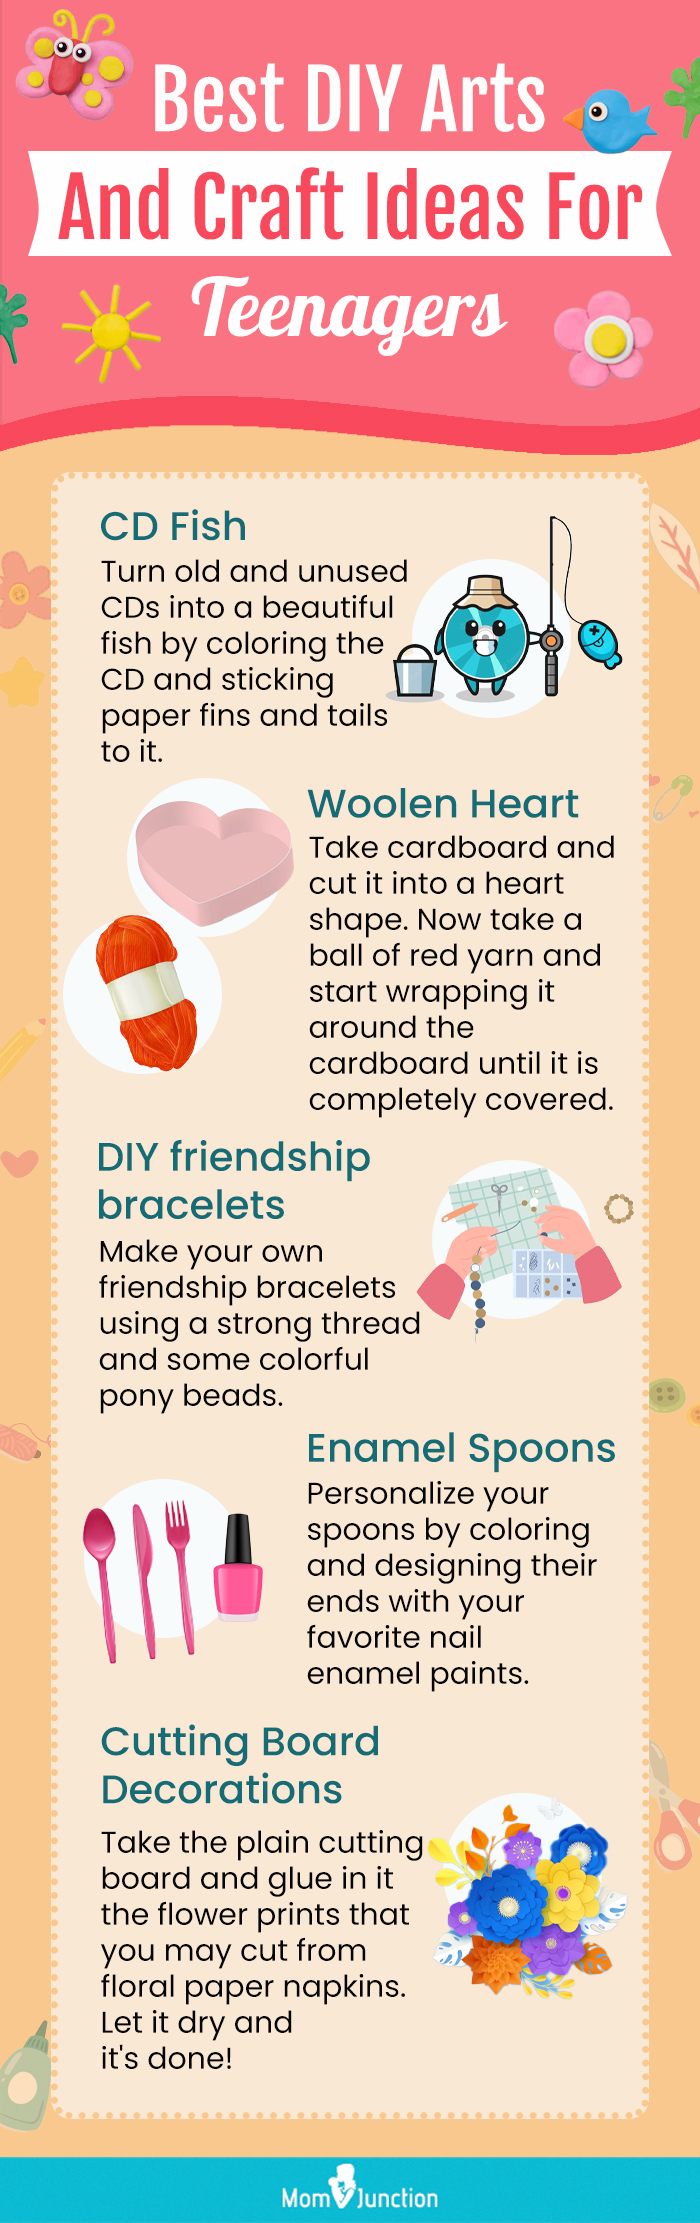 diy arts and craft ideas for teenagers [infographic]